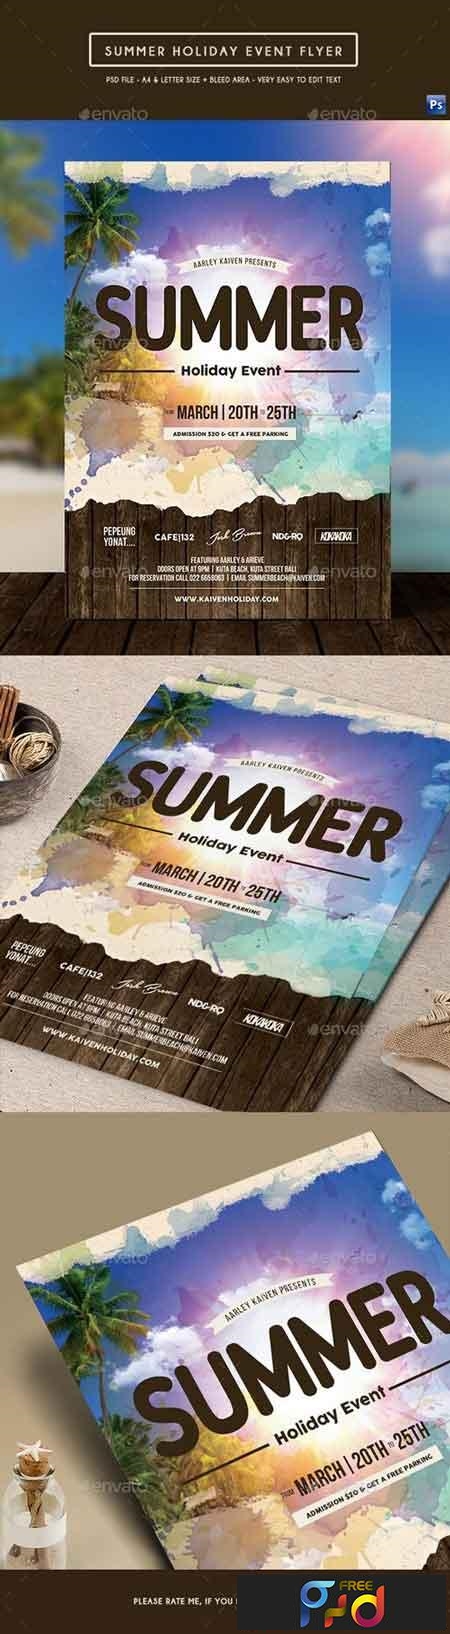 Summer Holiday Event Flyer 17373420 1